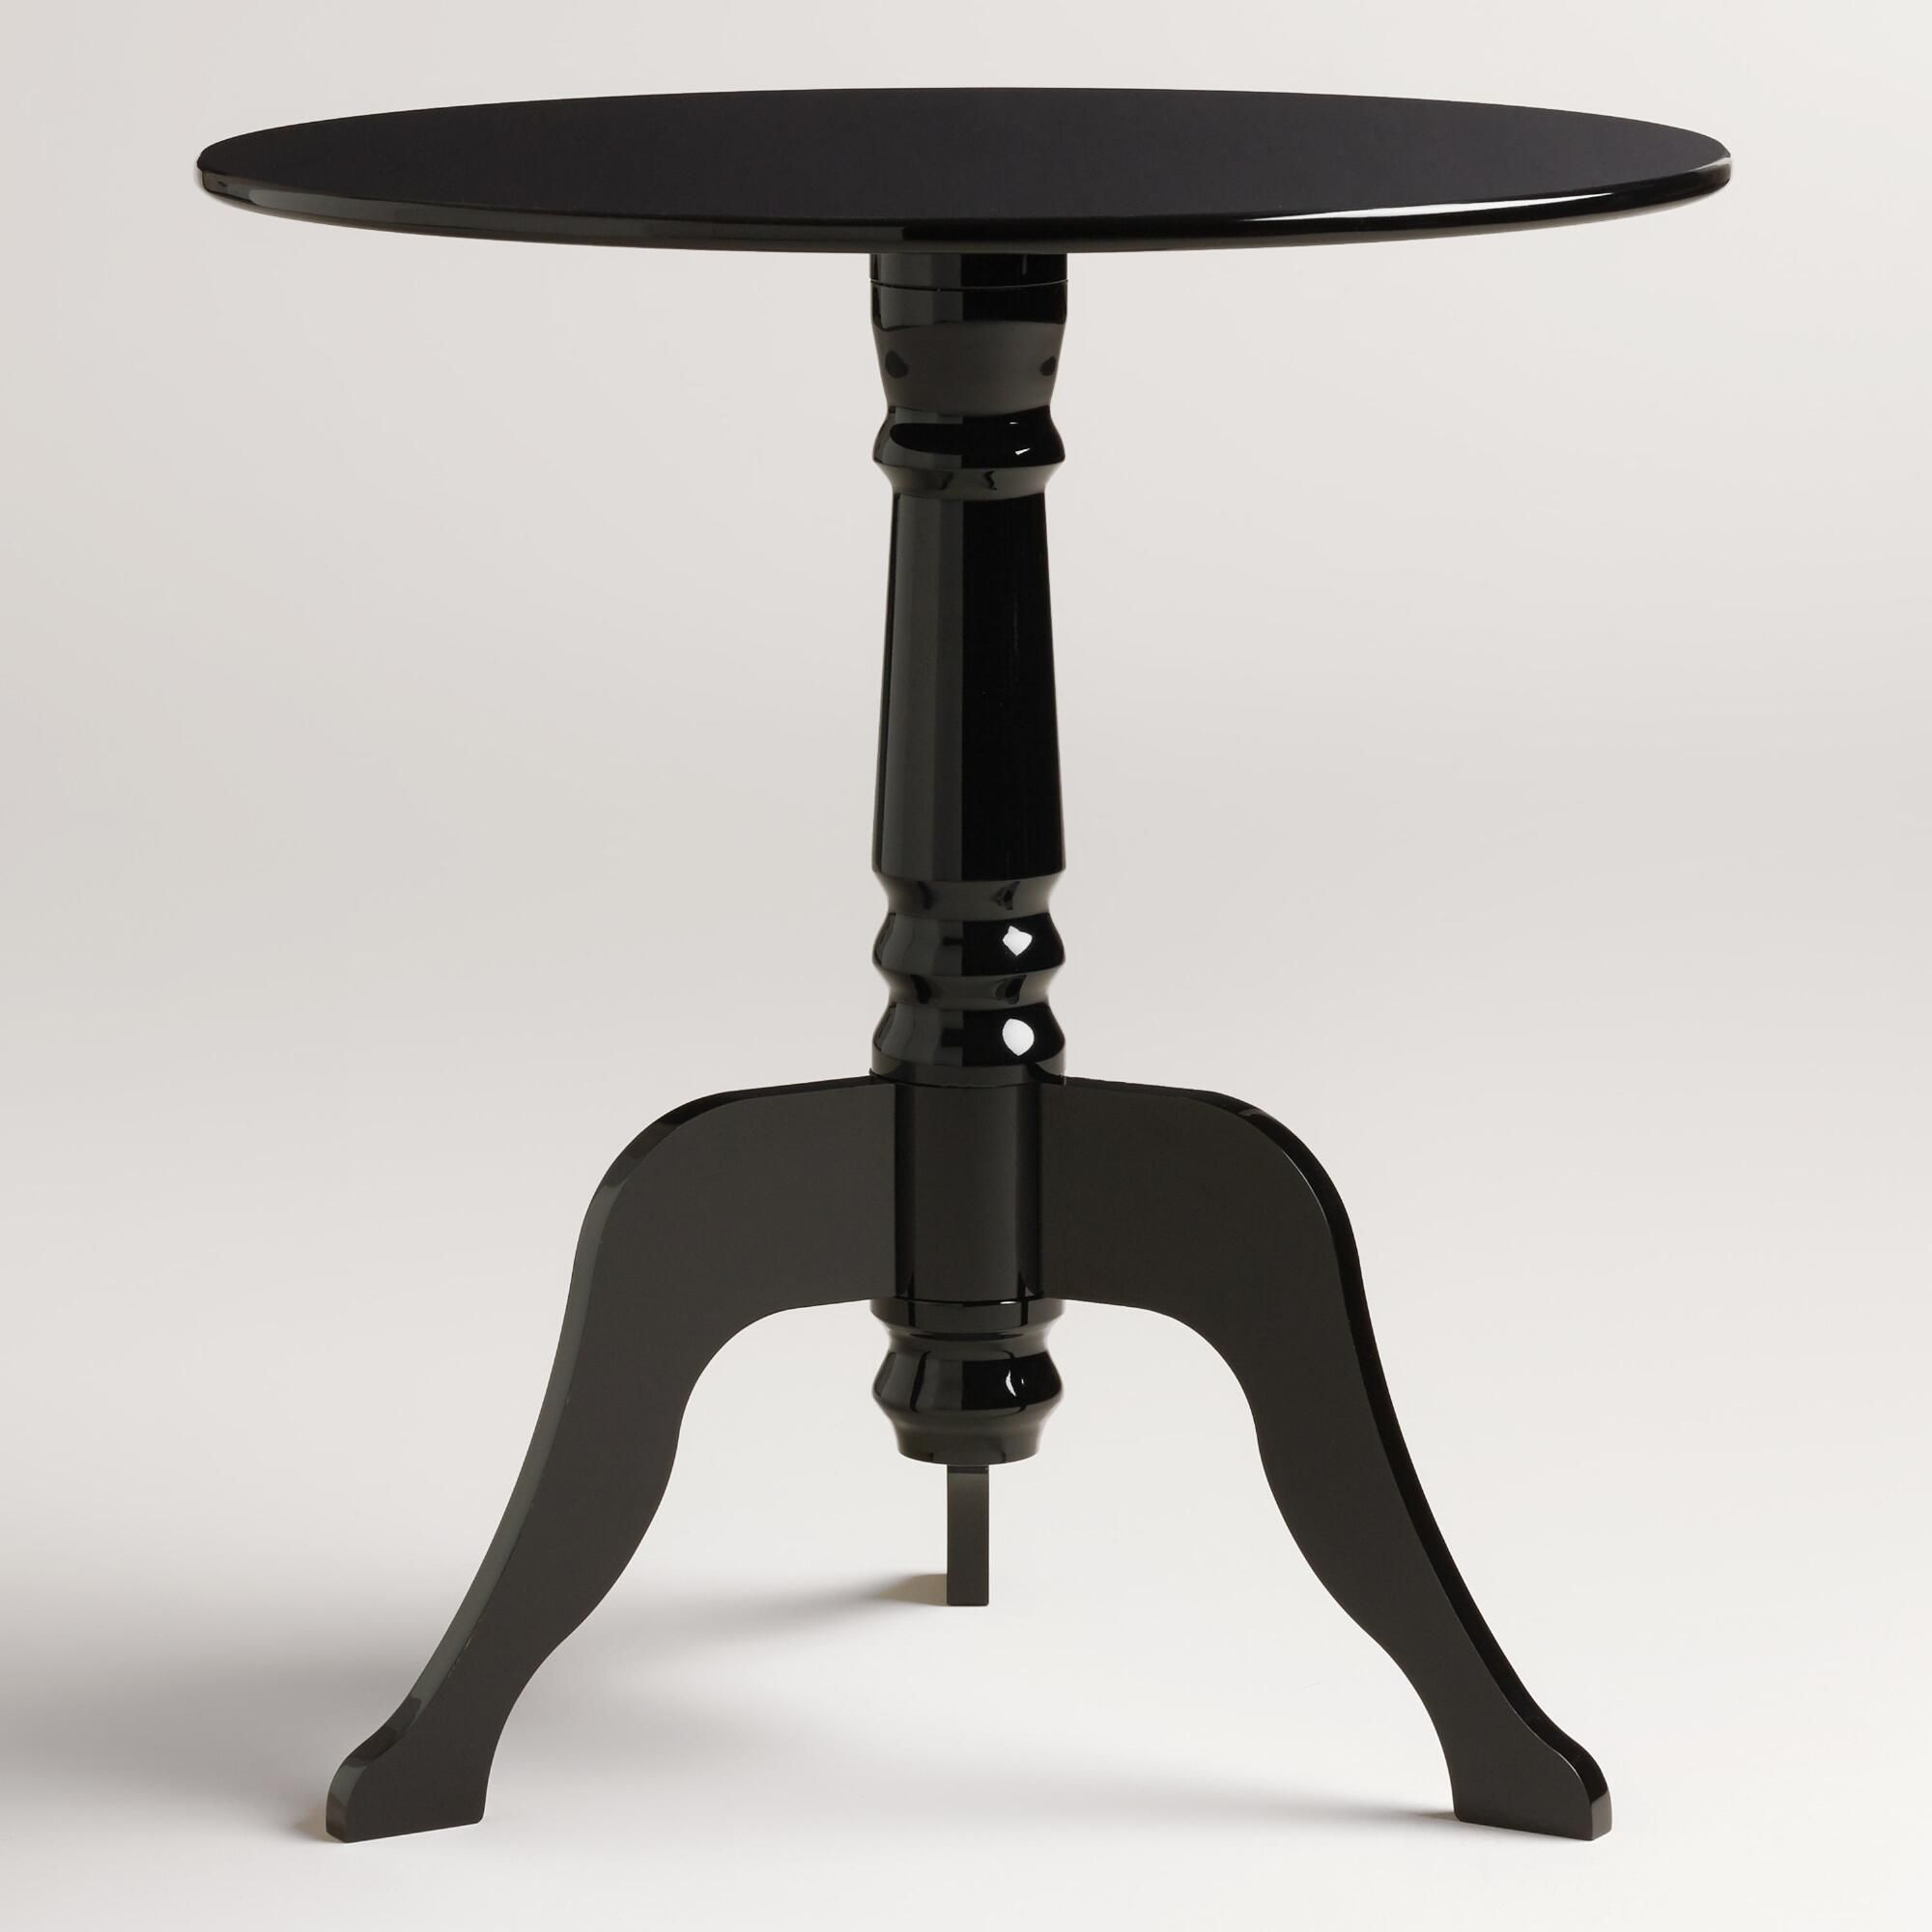 crafted deep black acrylic with curvy legs our queen anne style accent table side west elm coffee desk three legged concrete patio furniture clearance ikea bedroom cupboards metal